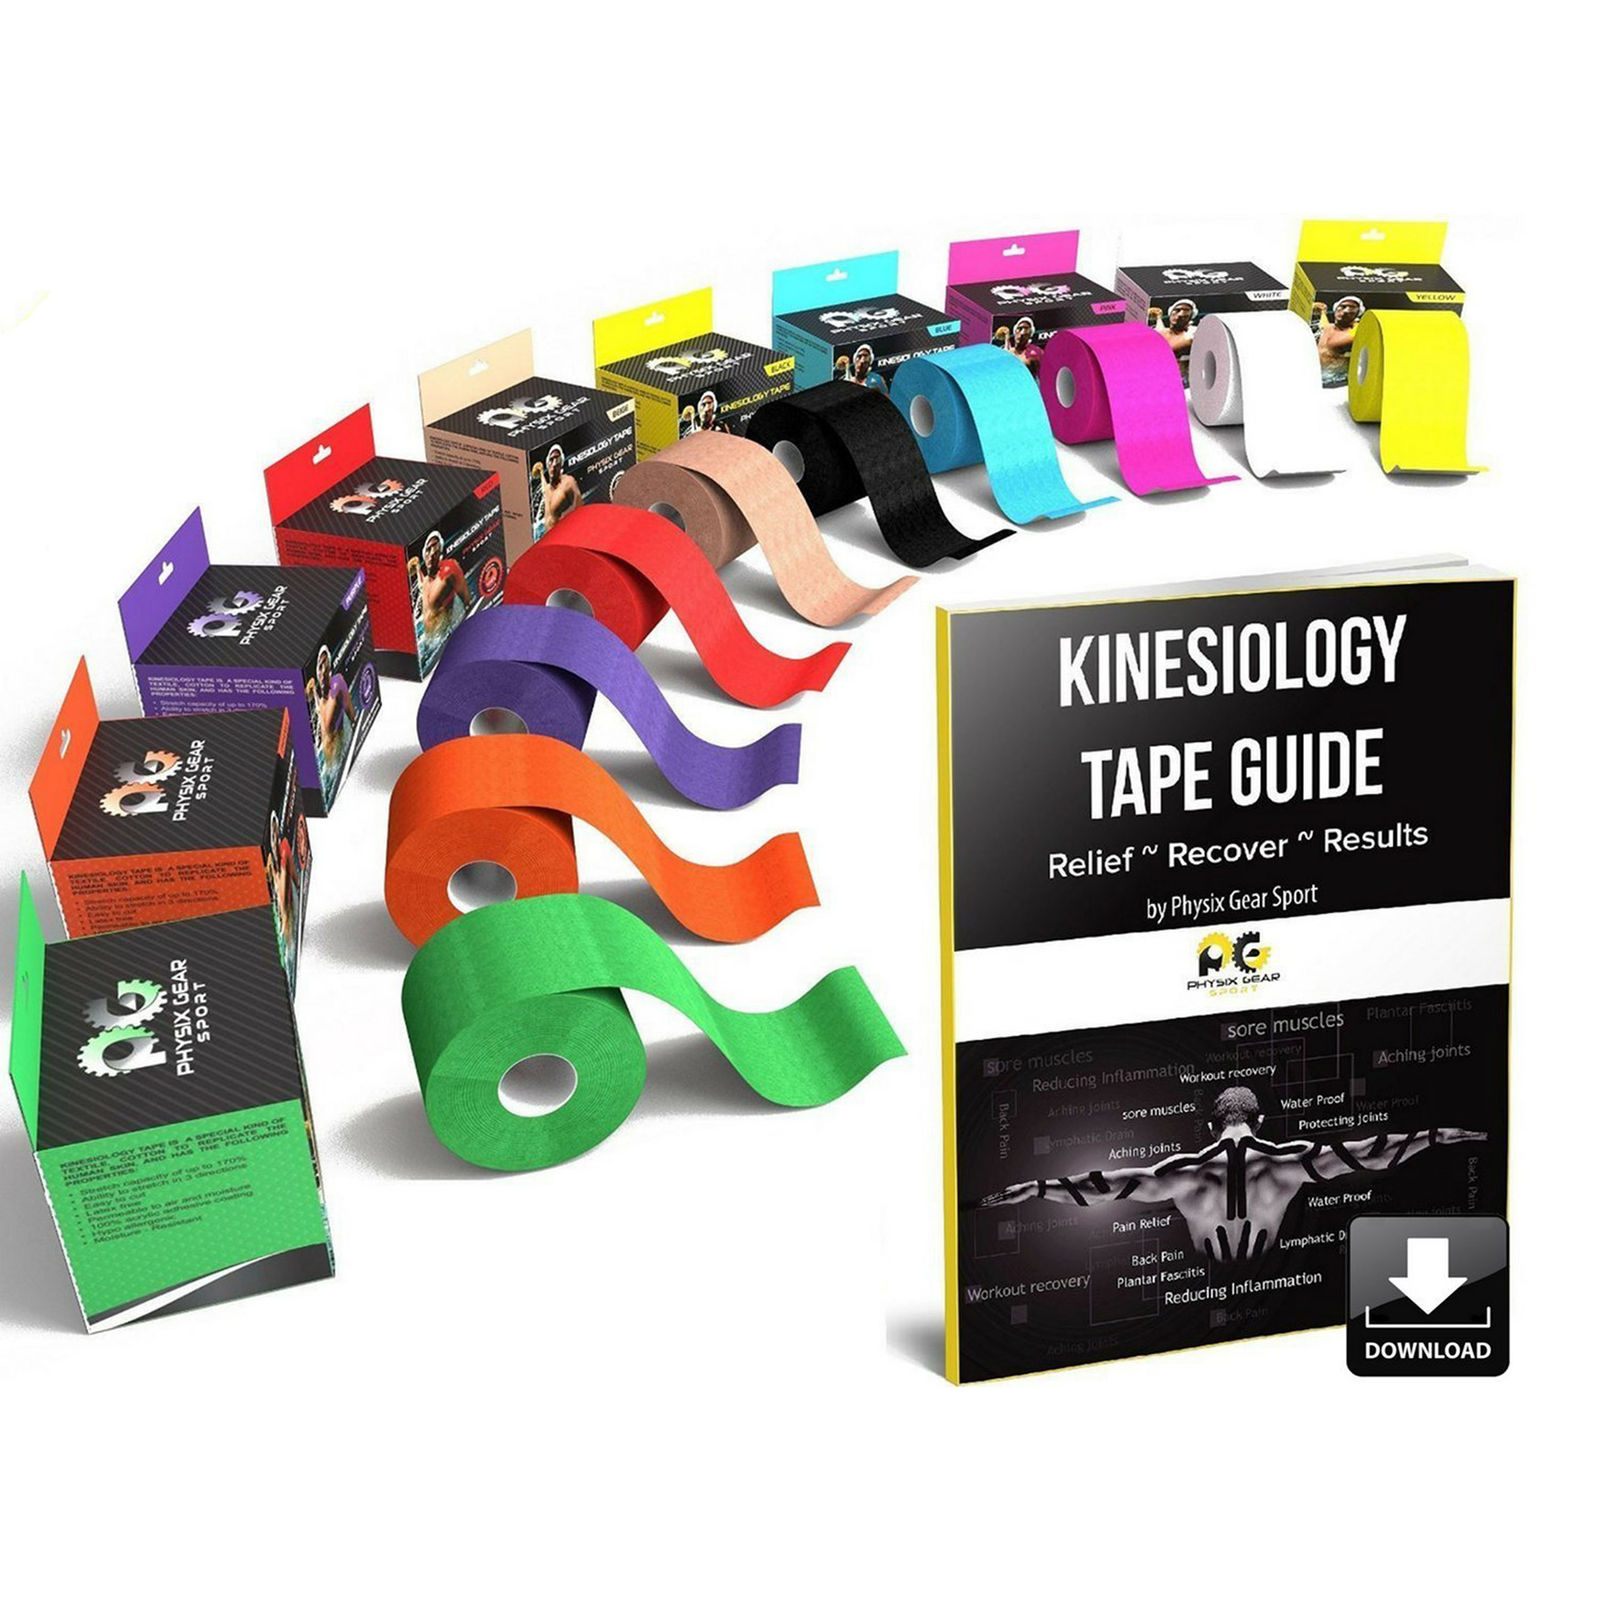 https://www.thetapewarehouse.com/product-image/203/physix-gear-sport-kinesiology-tape-with-free-illustrated-e-guide-16ft-uncut-roll-000.jpg